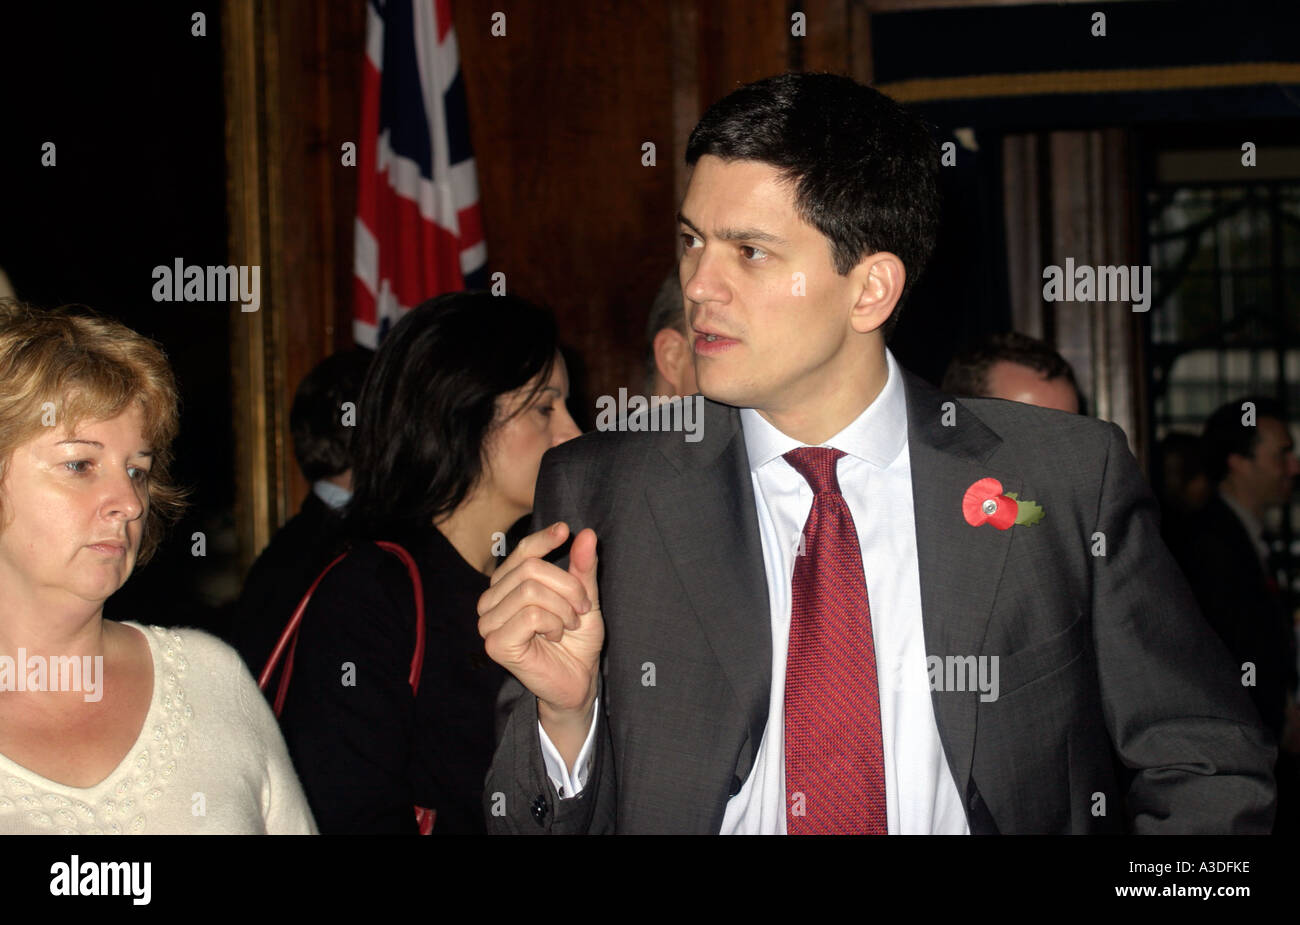 David Milliband appears to be discussing size with Karen Buck MP Stock Photo